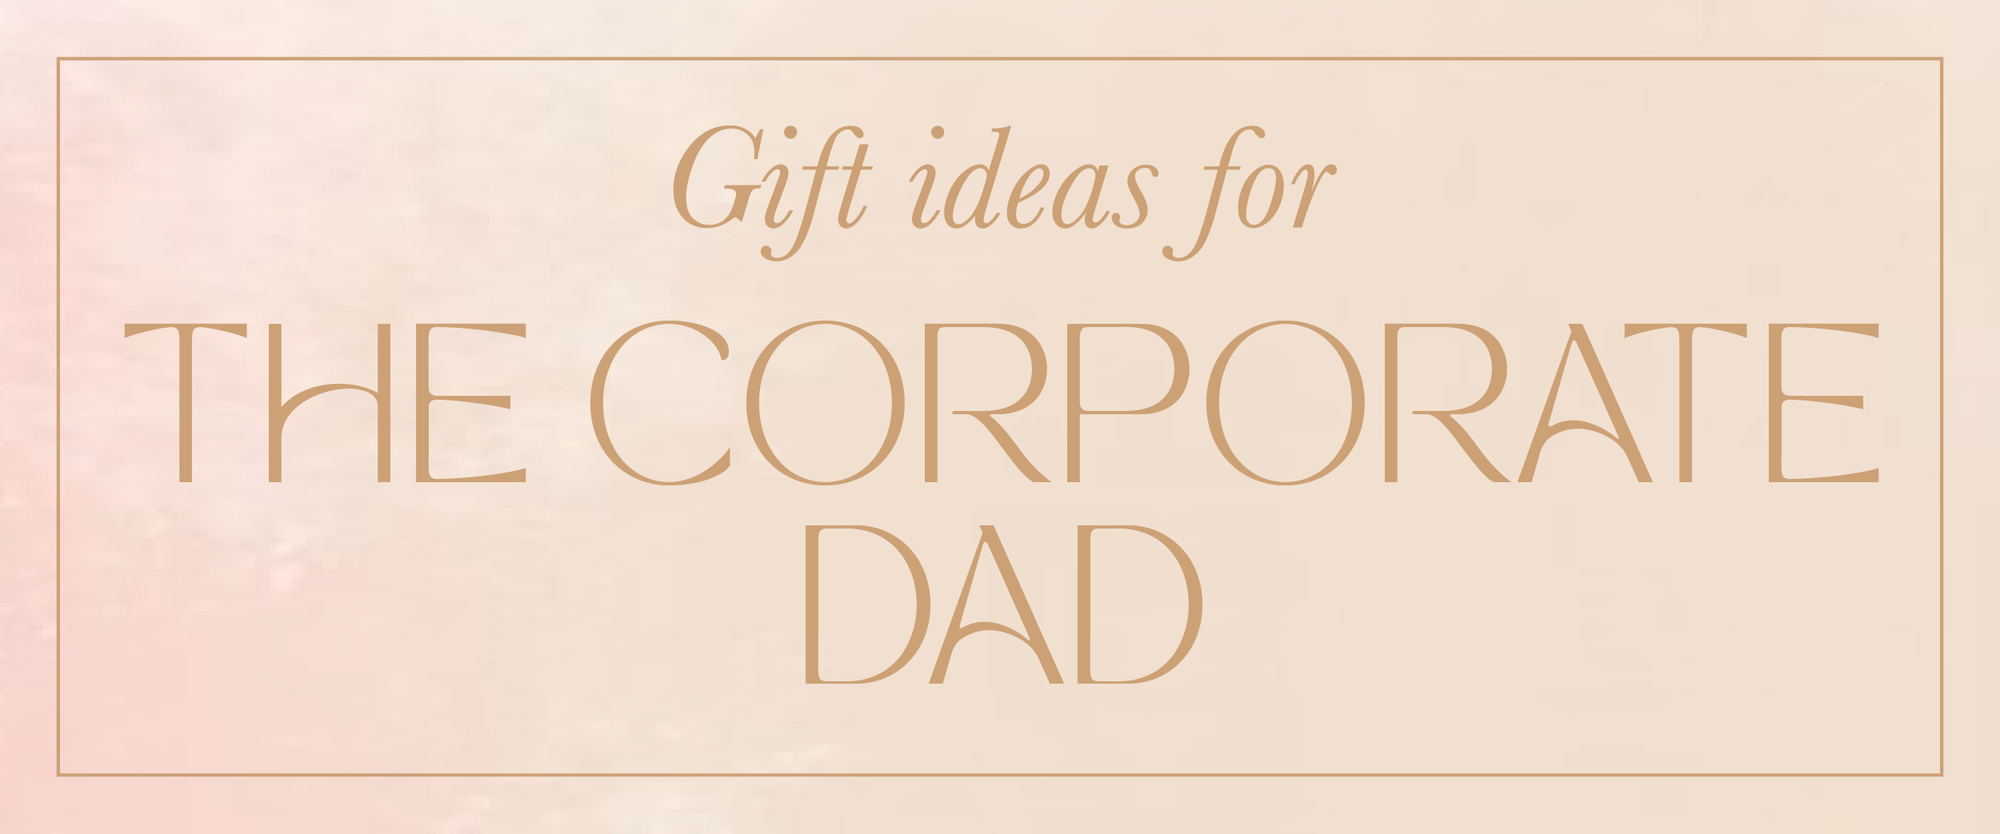 Gifts for the Corporate Dad